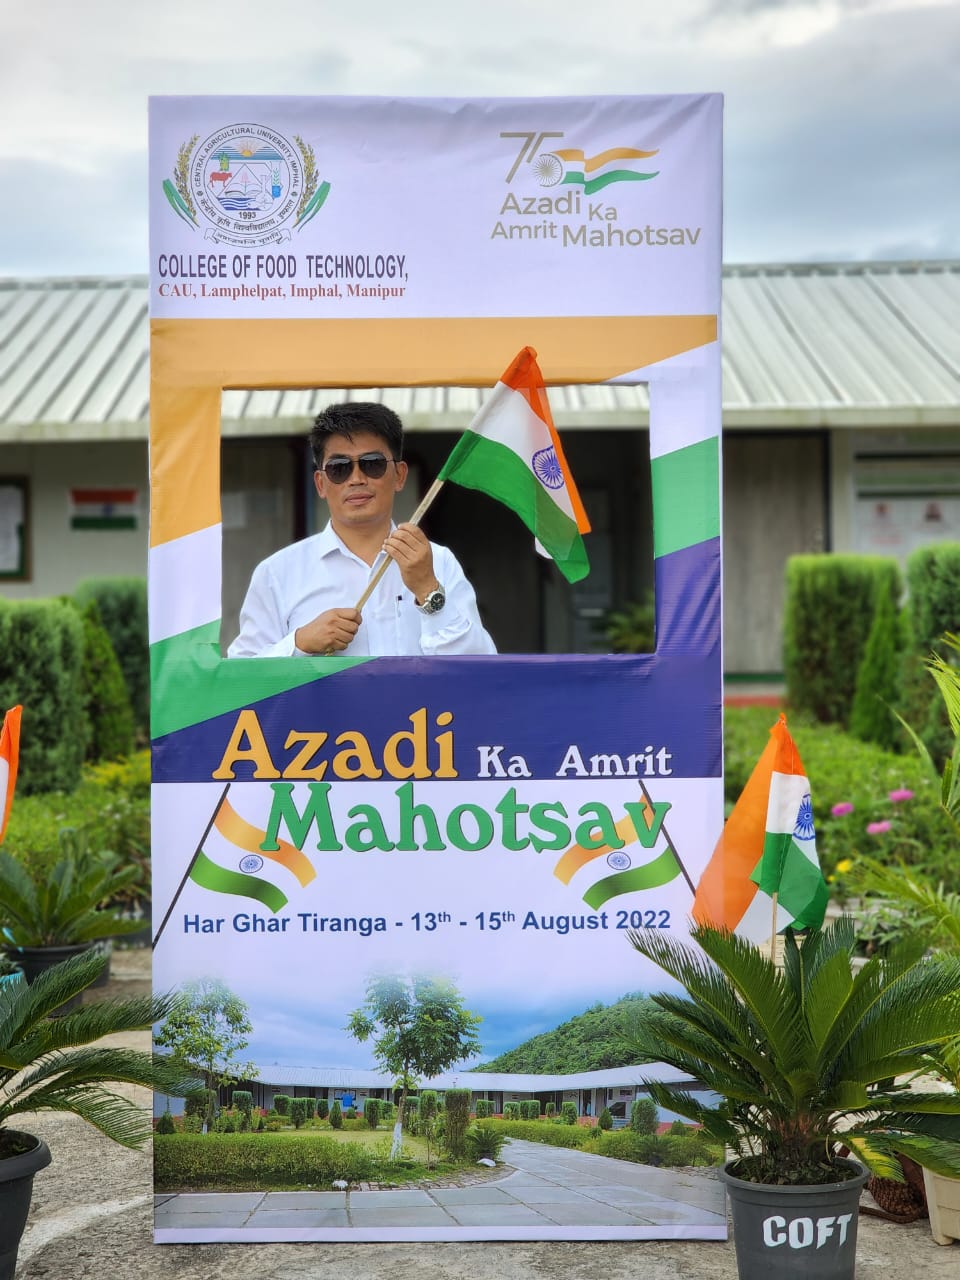 Dean i/c Dr. Ng. Joykumar Singh, College of Food Technology, CAU, Imphal and other staff of college at the photo booth in commemoration of Har Ghar Tiranga celebration as part of India’s 75 years of Independence.